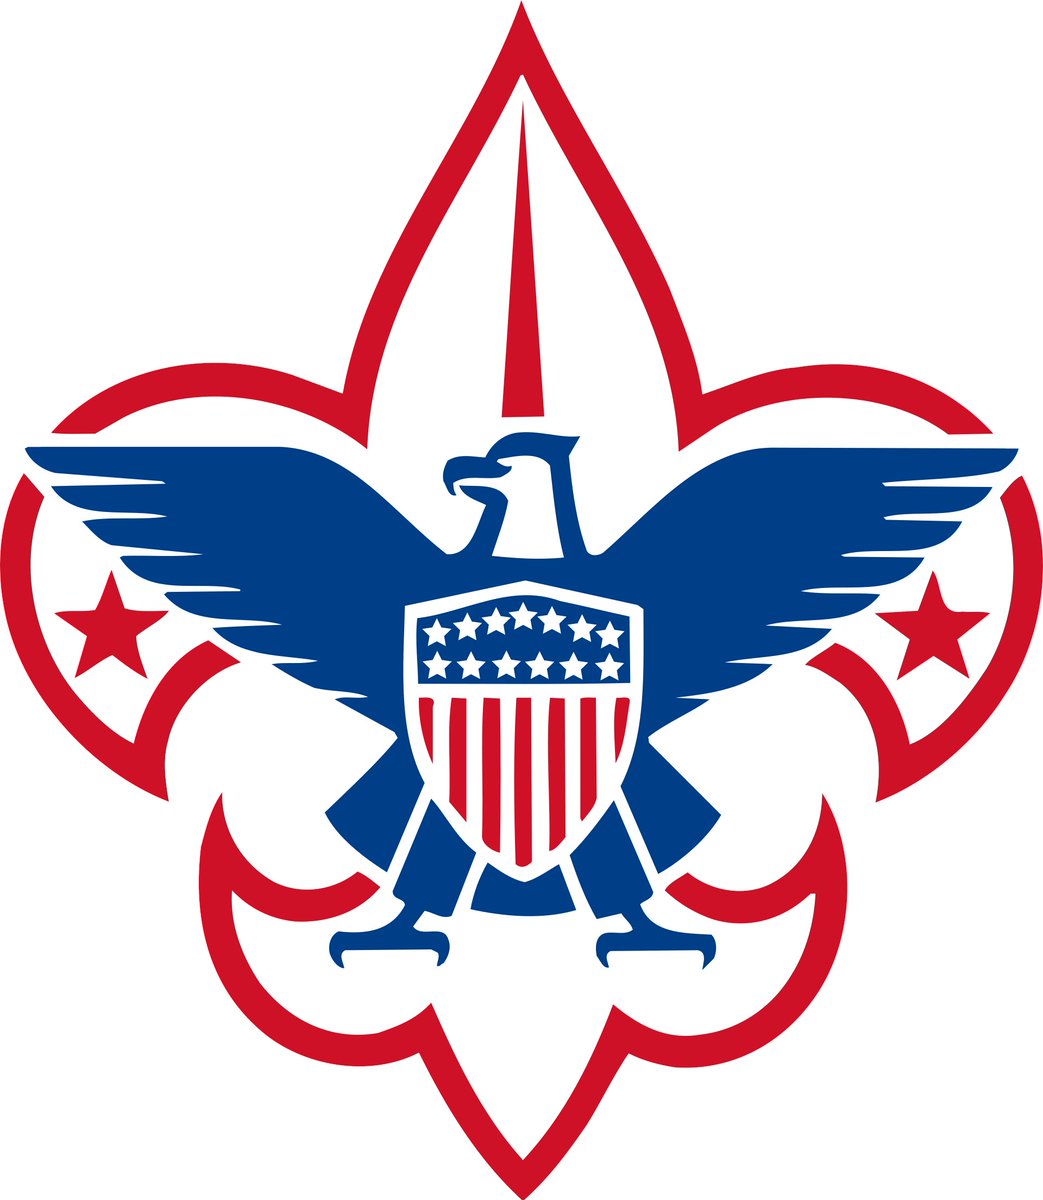 The Boy Scouts have announced they'll be changing their name to 'Scouting America' in order to be more inclusive. What's your reaction to this name change?